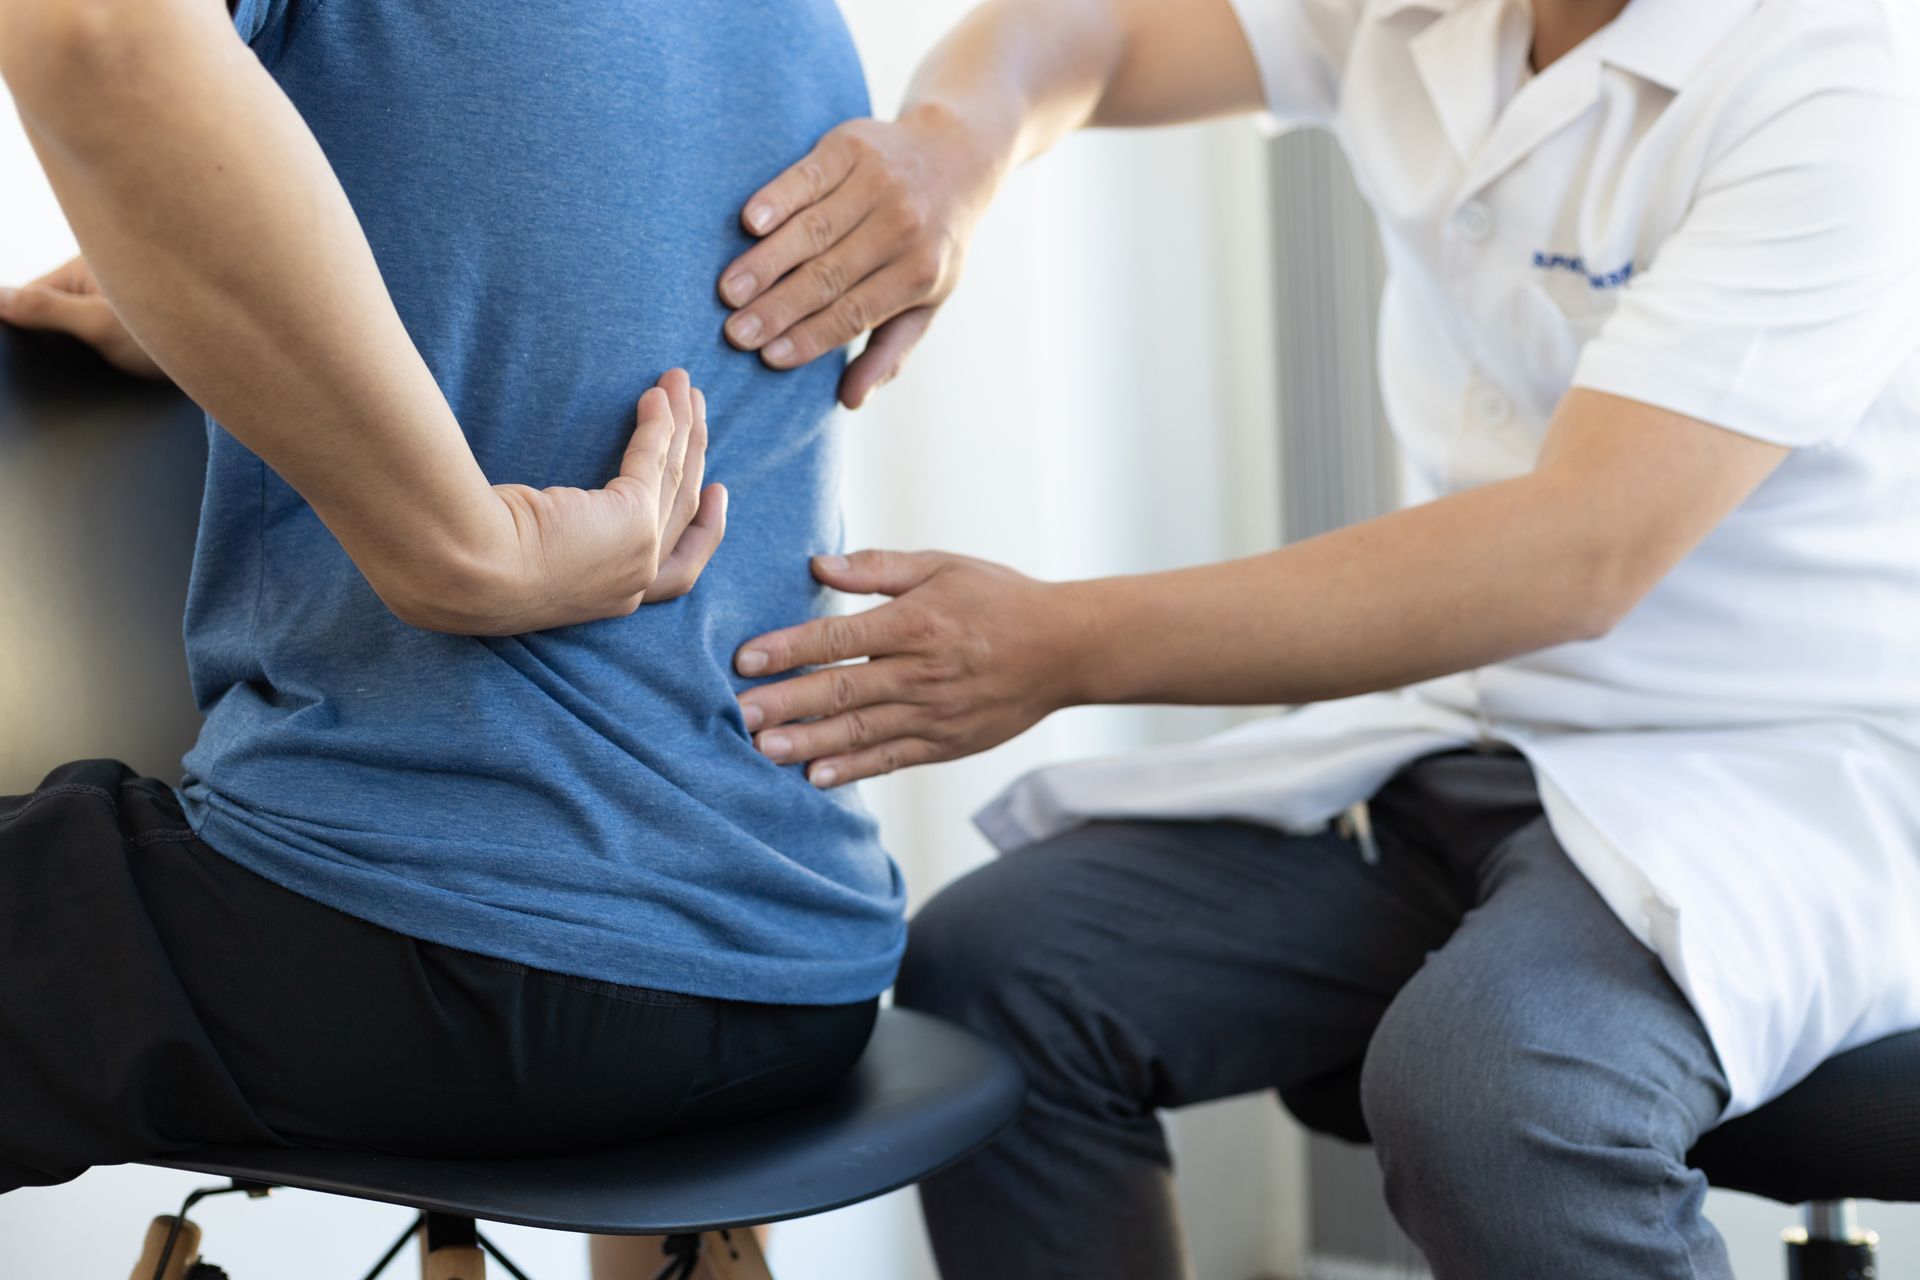 A man is sitting in a chair while a doctor examines his back.